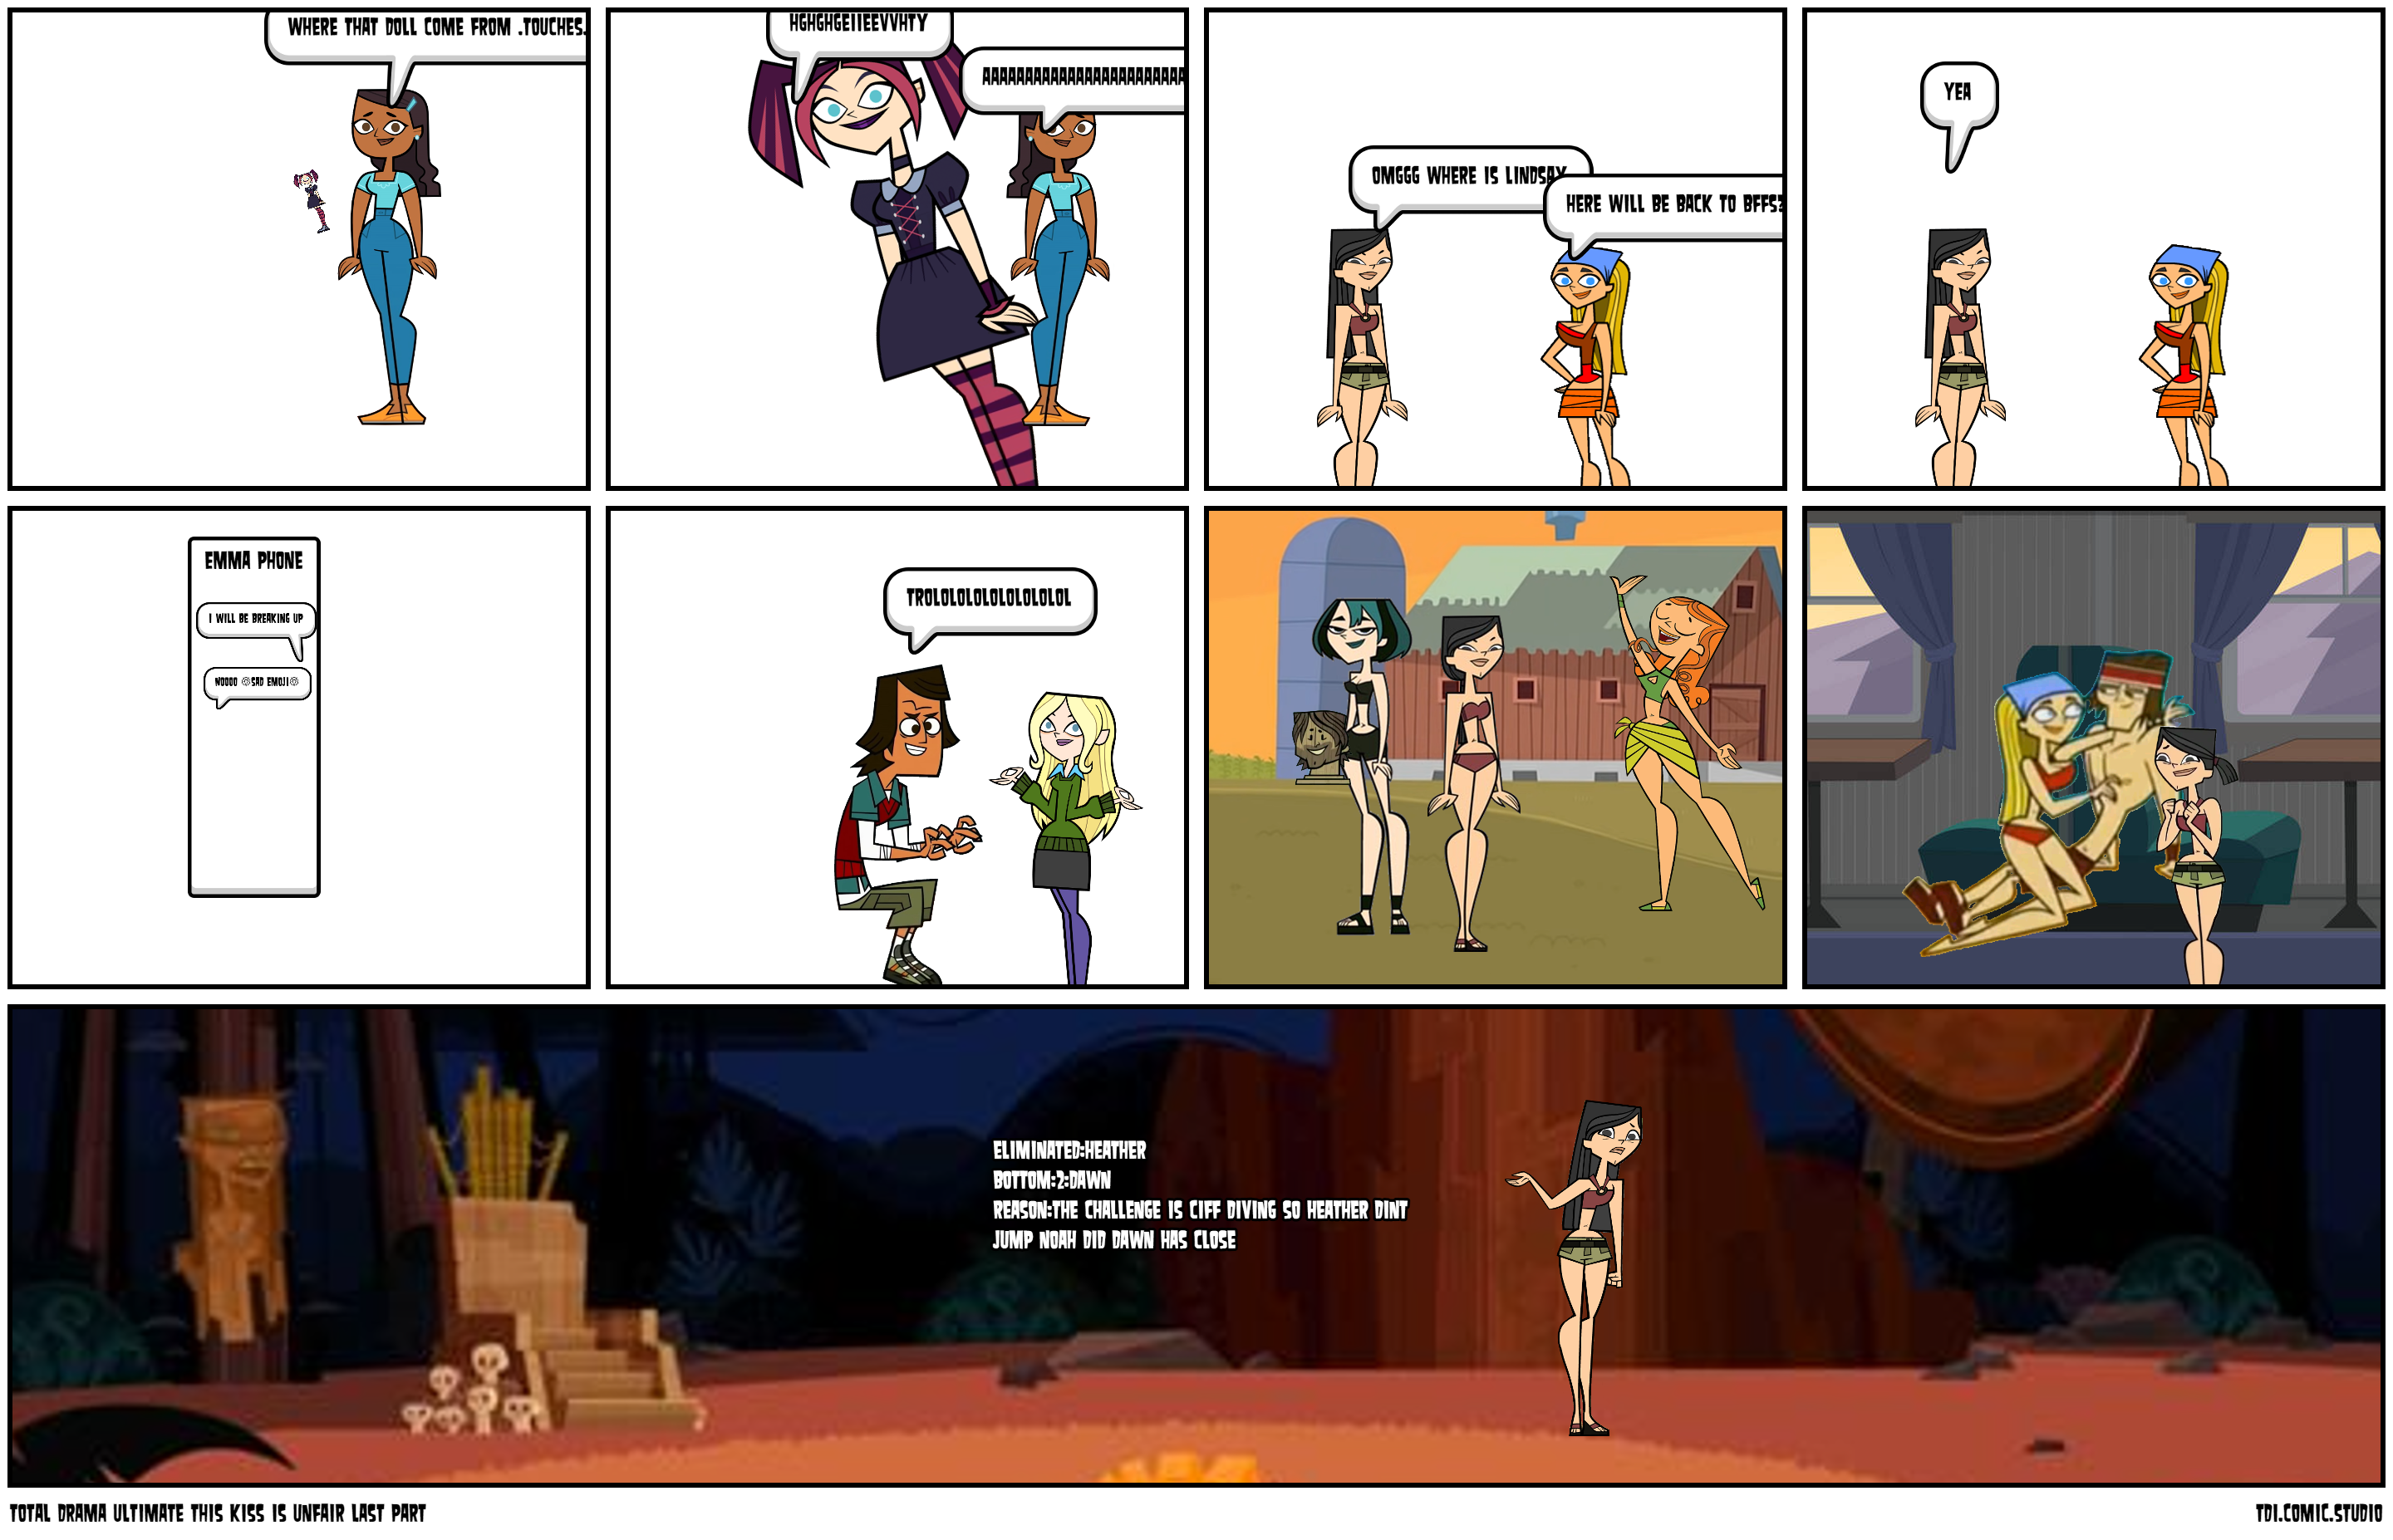 total drama ultimate this kiss is unfair last part